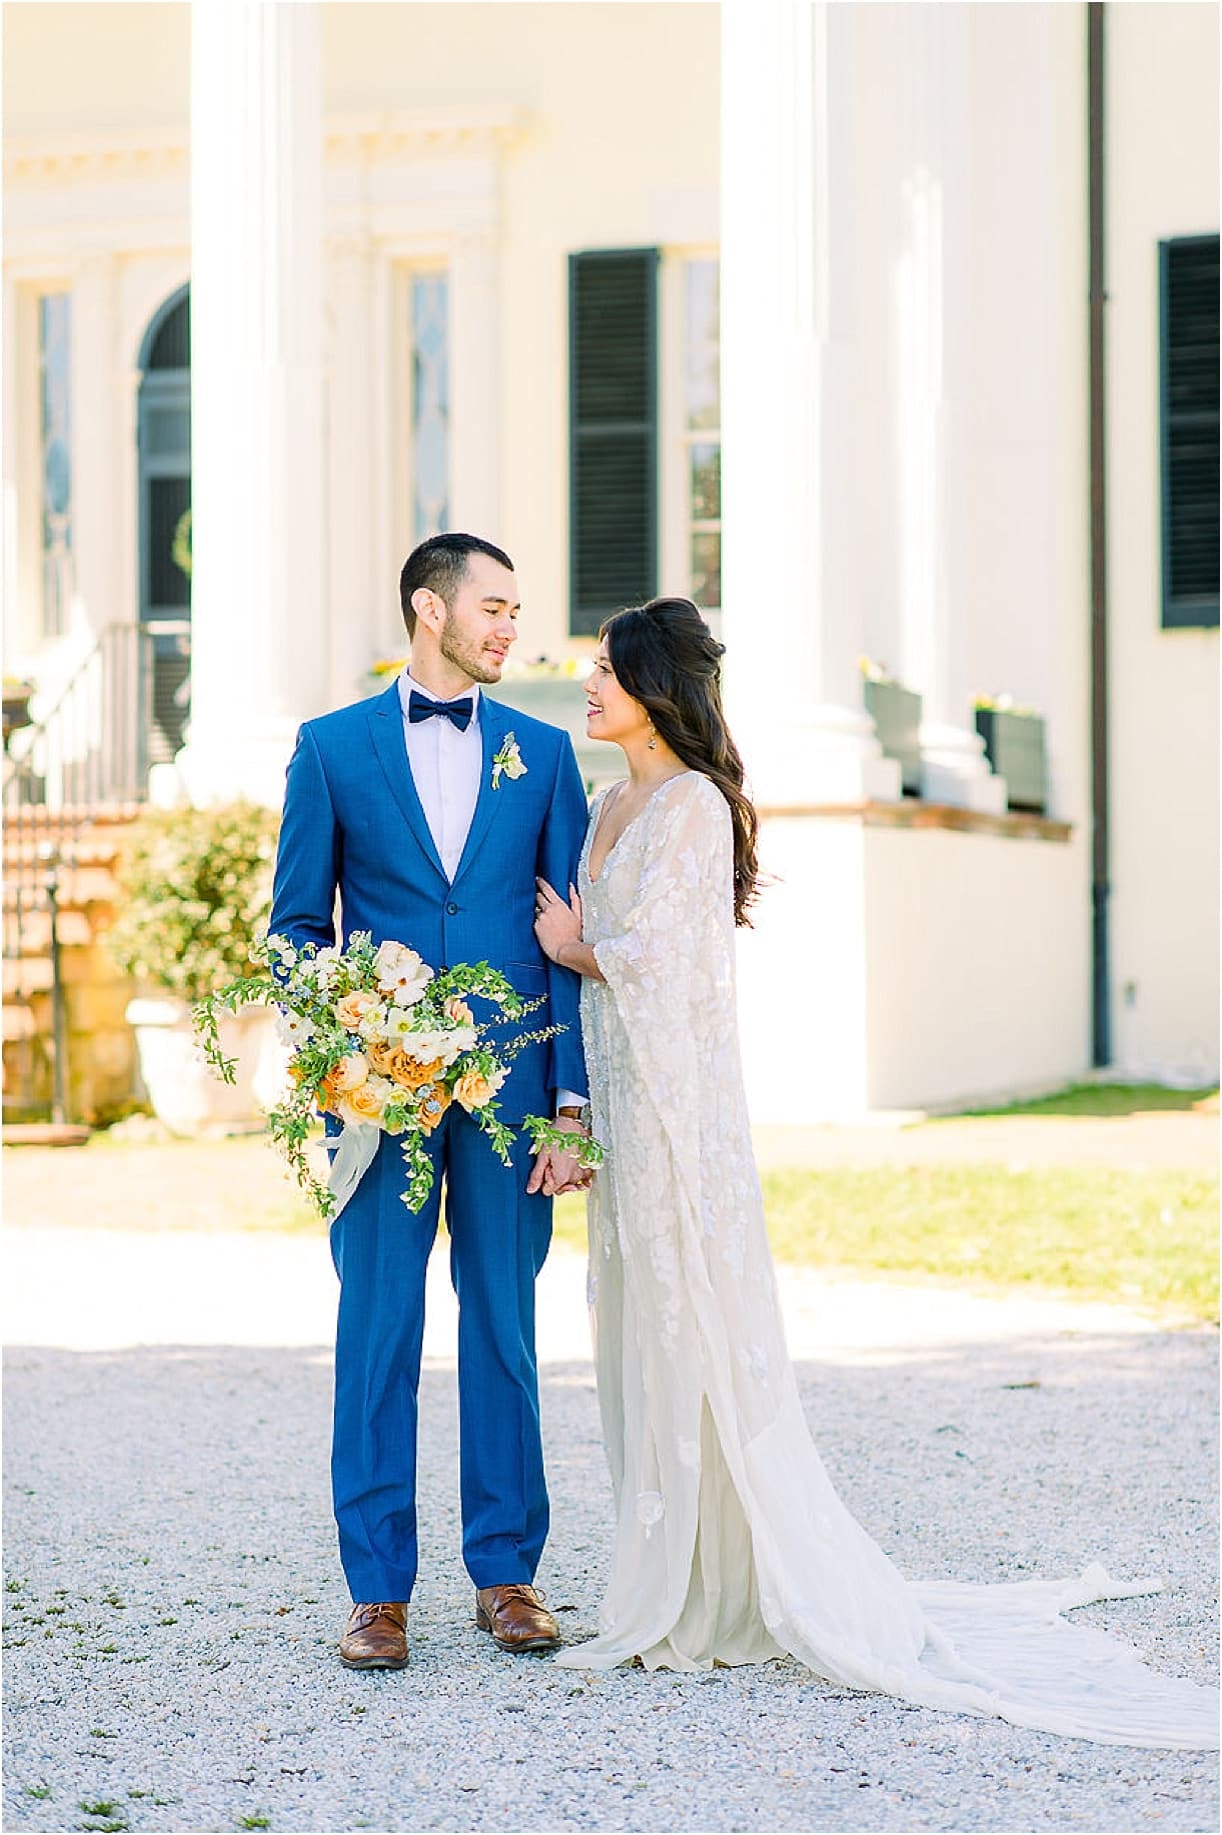 Autumnal Styled Shoot with Unique Spring Wedding Colors | Hill City Bride Virginia Wedding Blog Groom Suit Dress Gown Bouquet